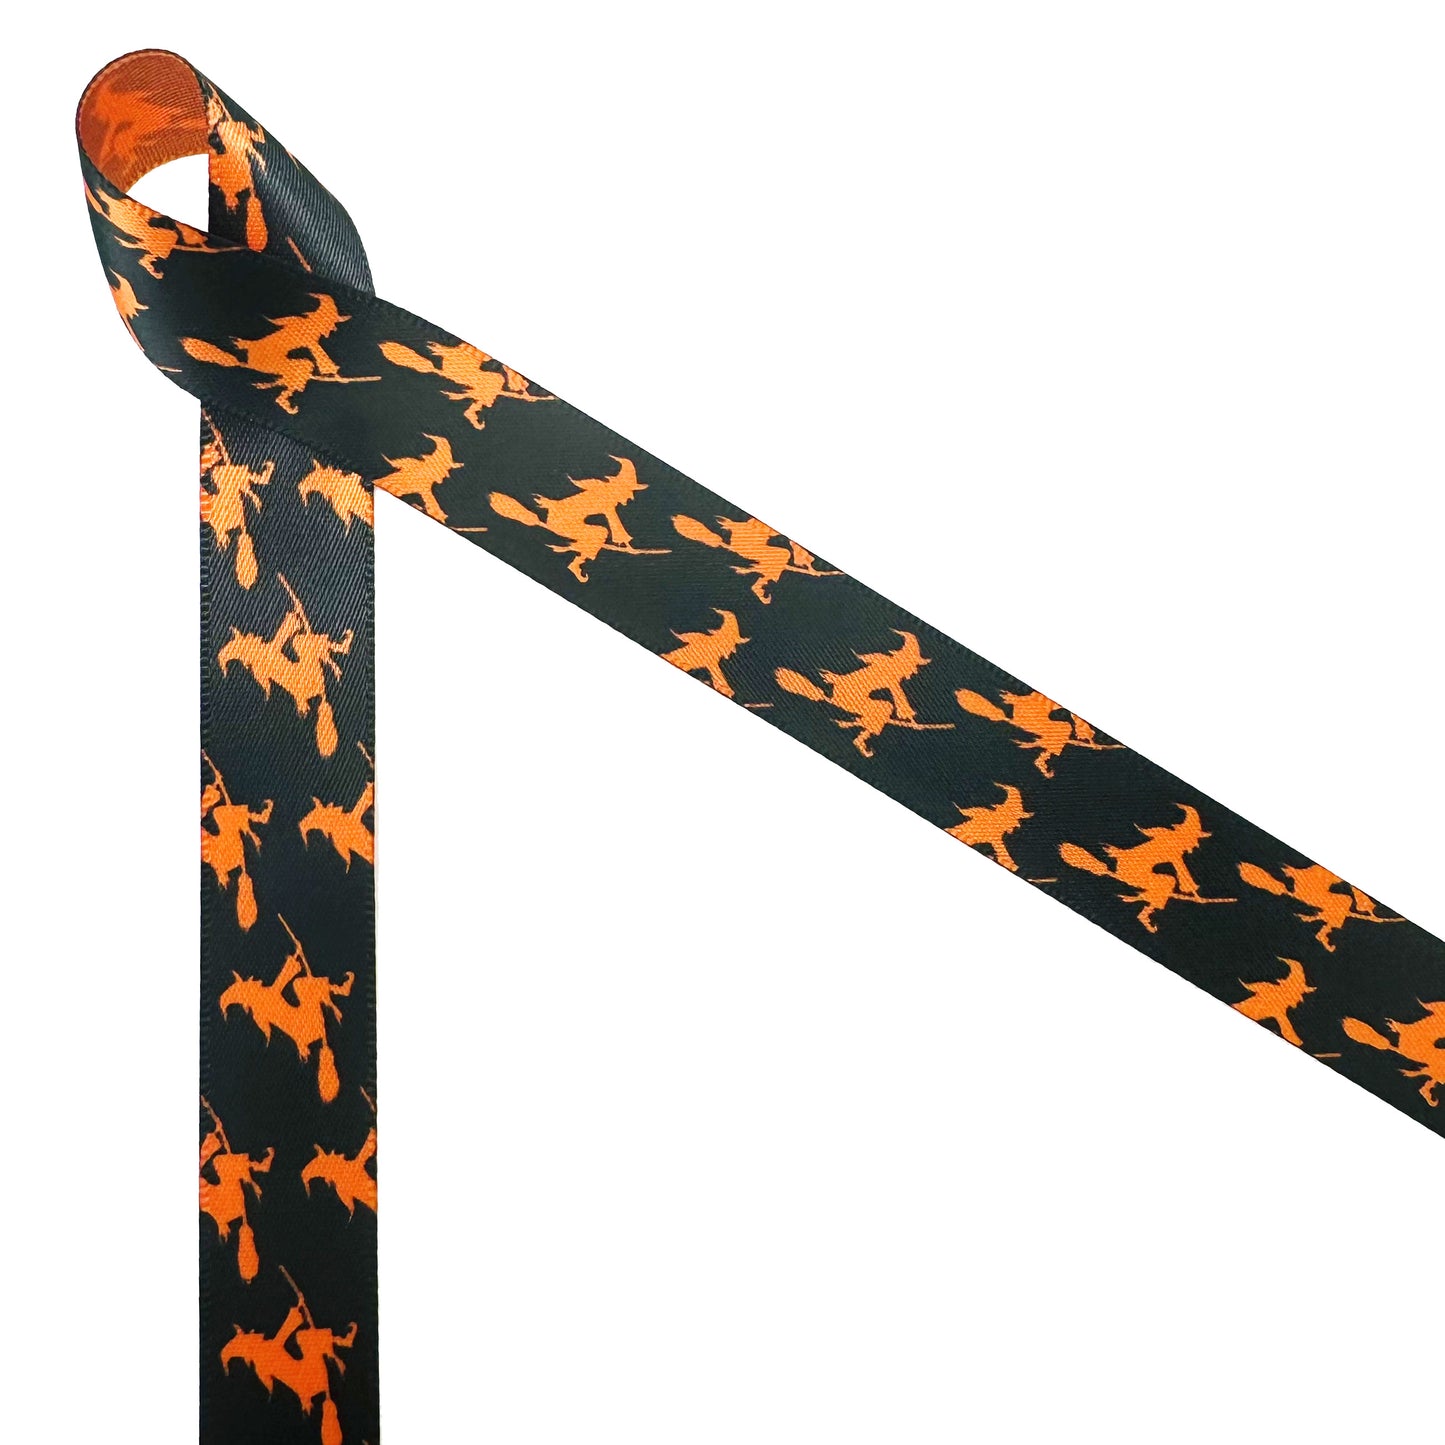 Witch ribbon for Halloween witches in orange silhouette on a black background printed on 5/8" torrid orange satin